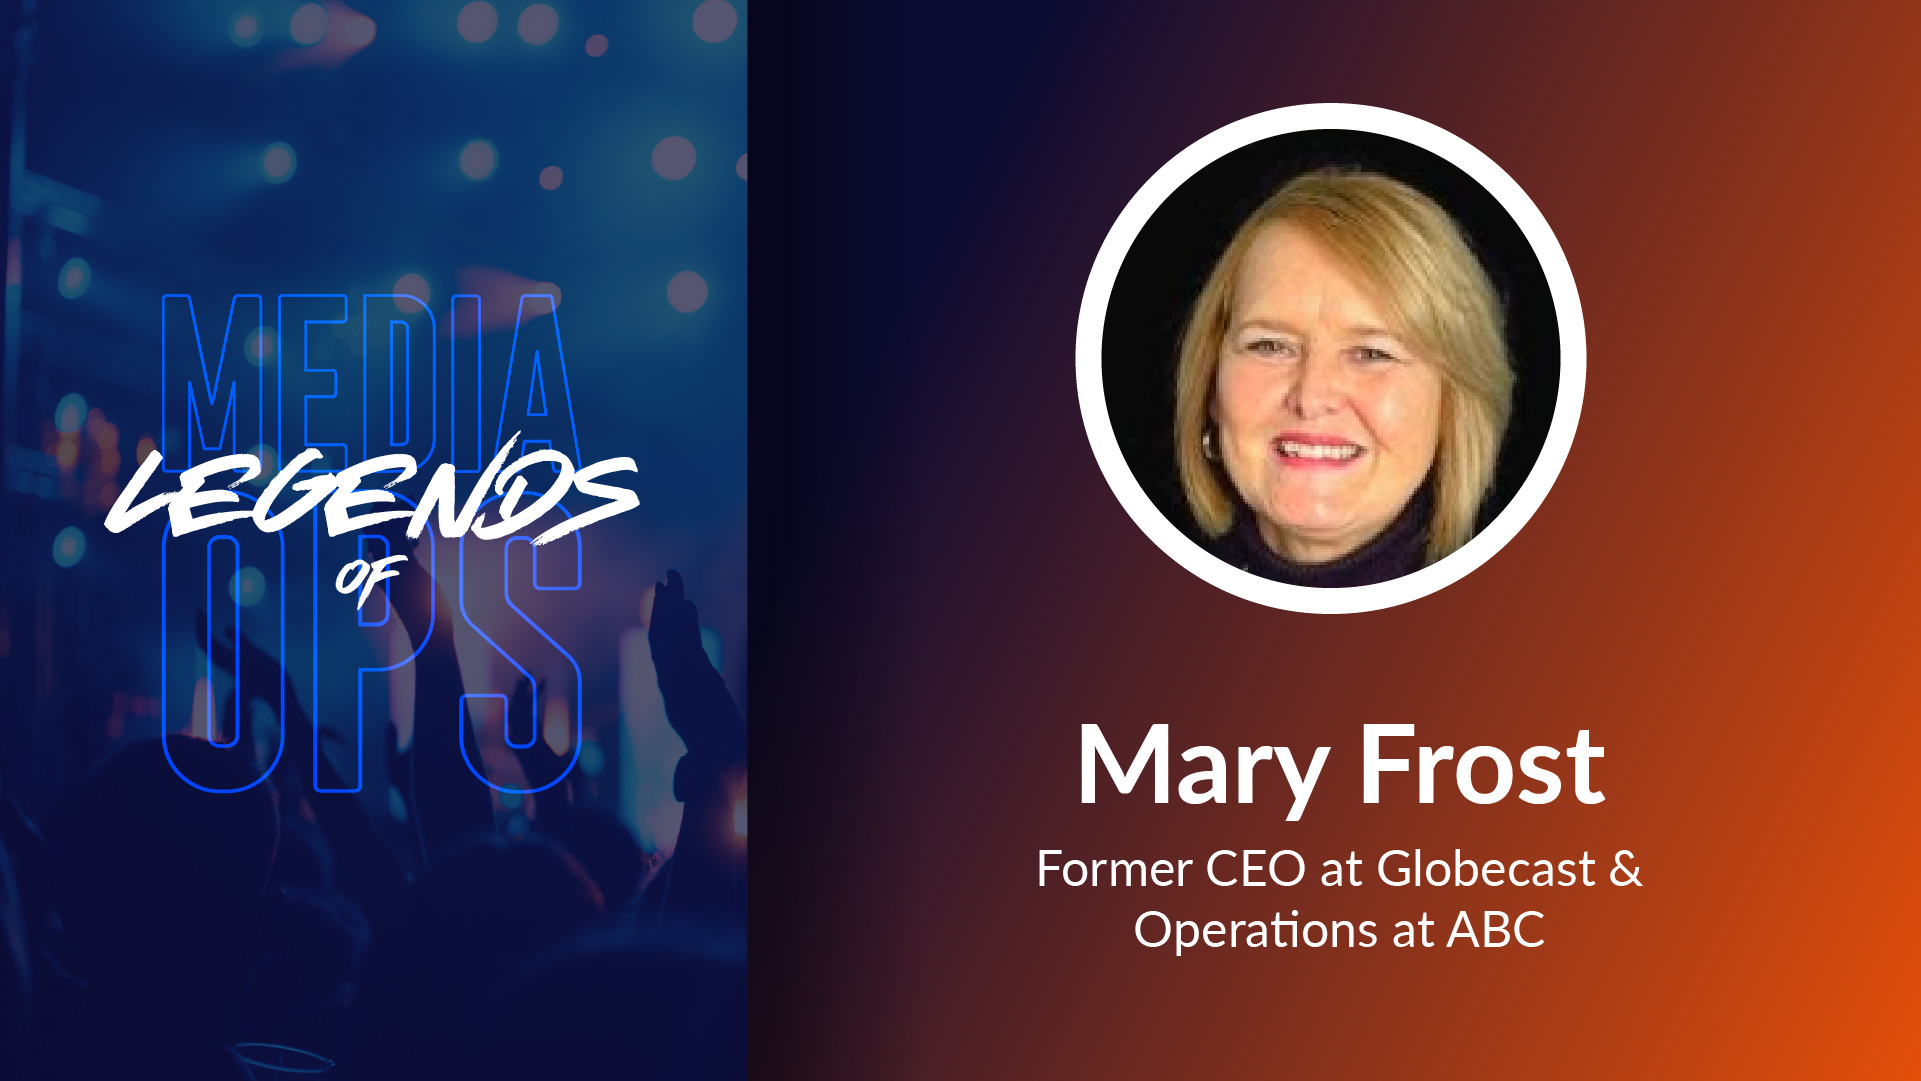 Xytech presents Media Ops Legend - Mary Frost